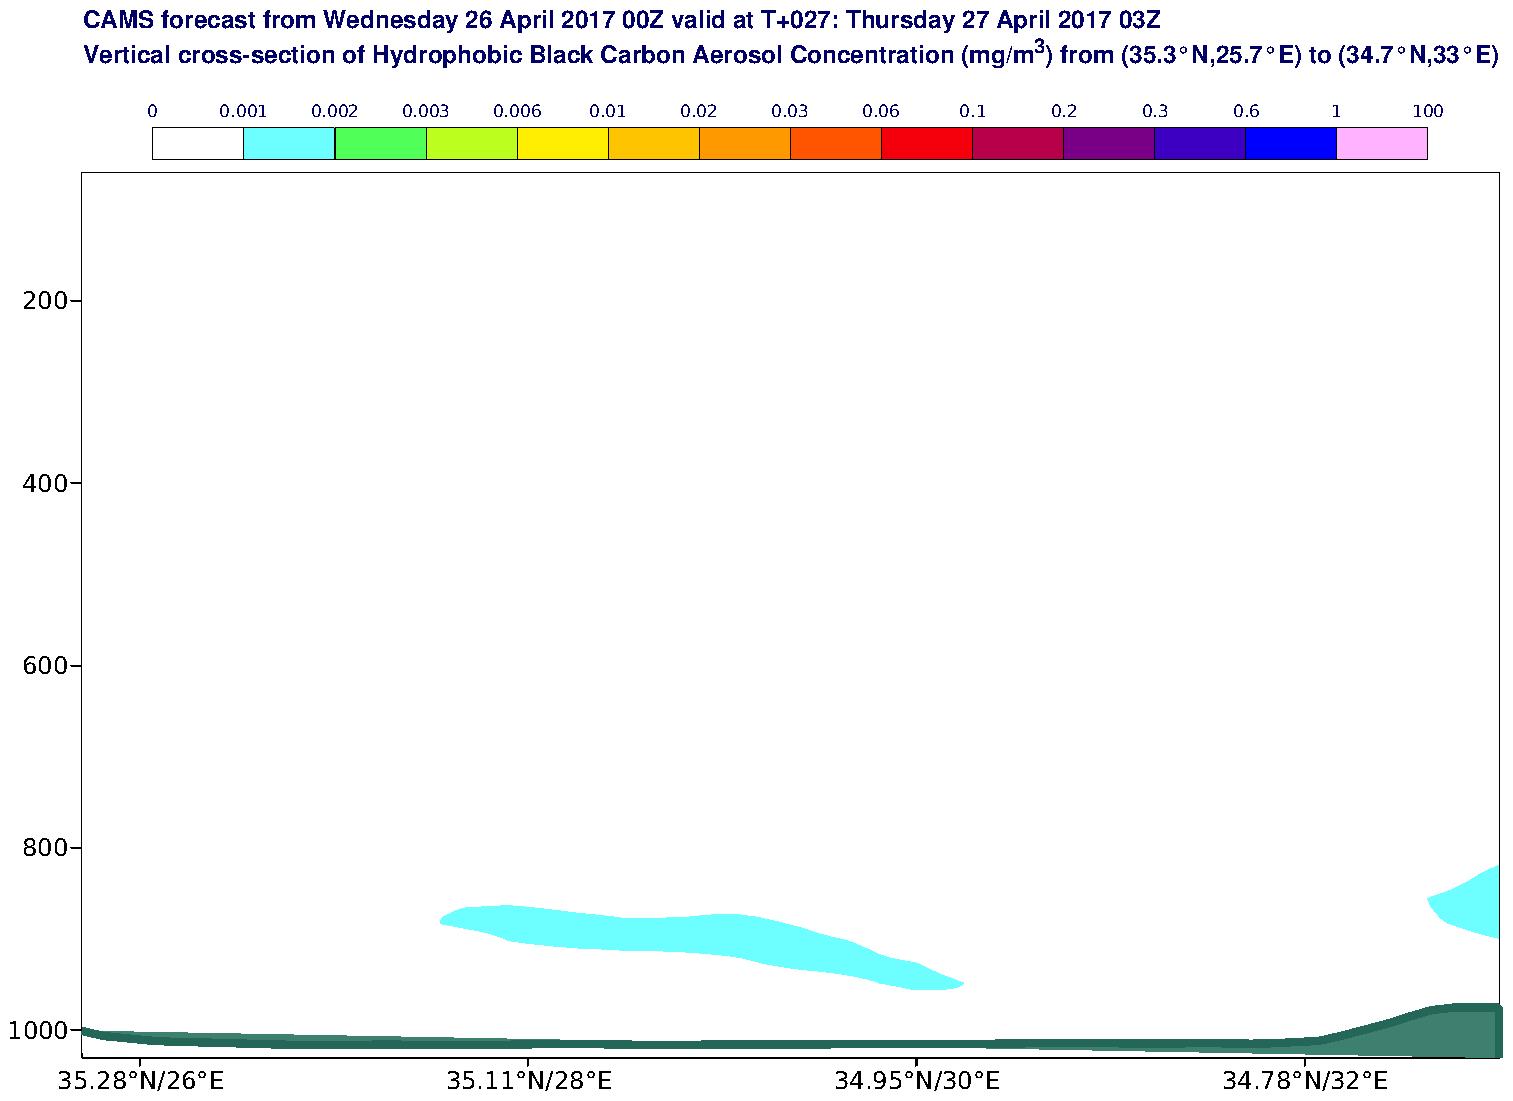 Vertical cross-section of Hydrophobic Black Carbon Aerosol Concentration (mg/m3) valid at T27 - 2017-04-27 03:00